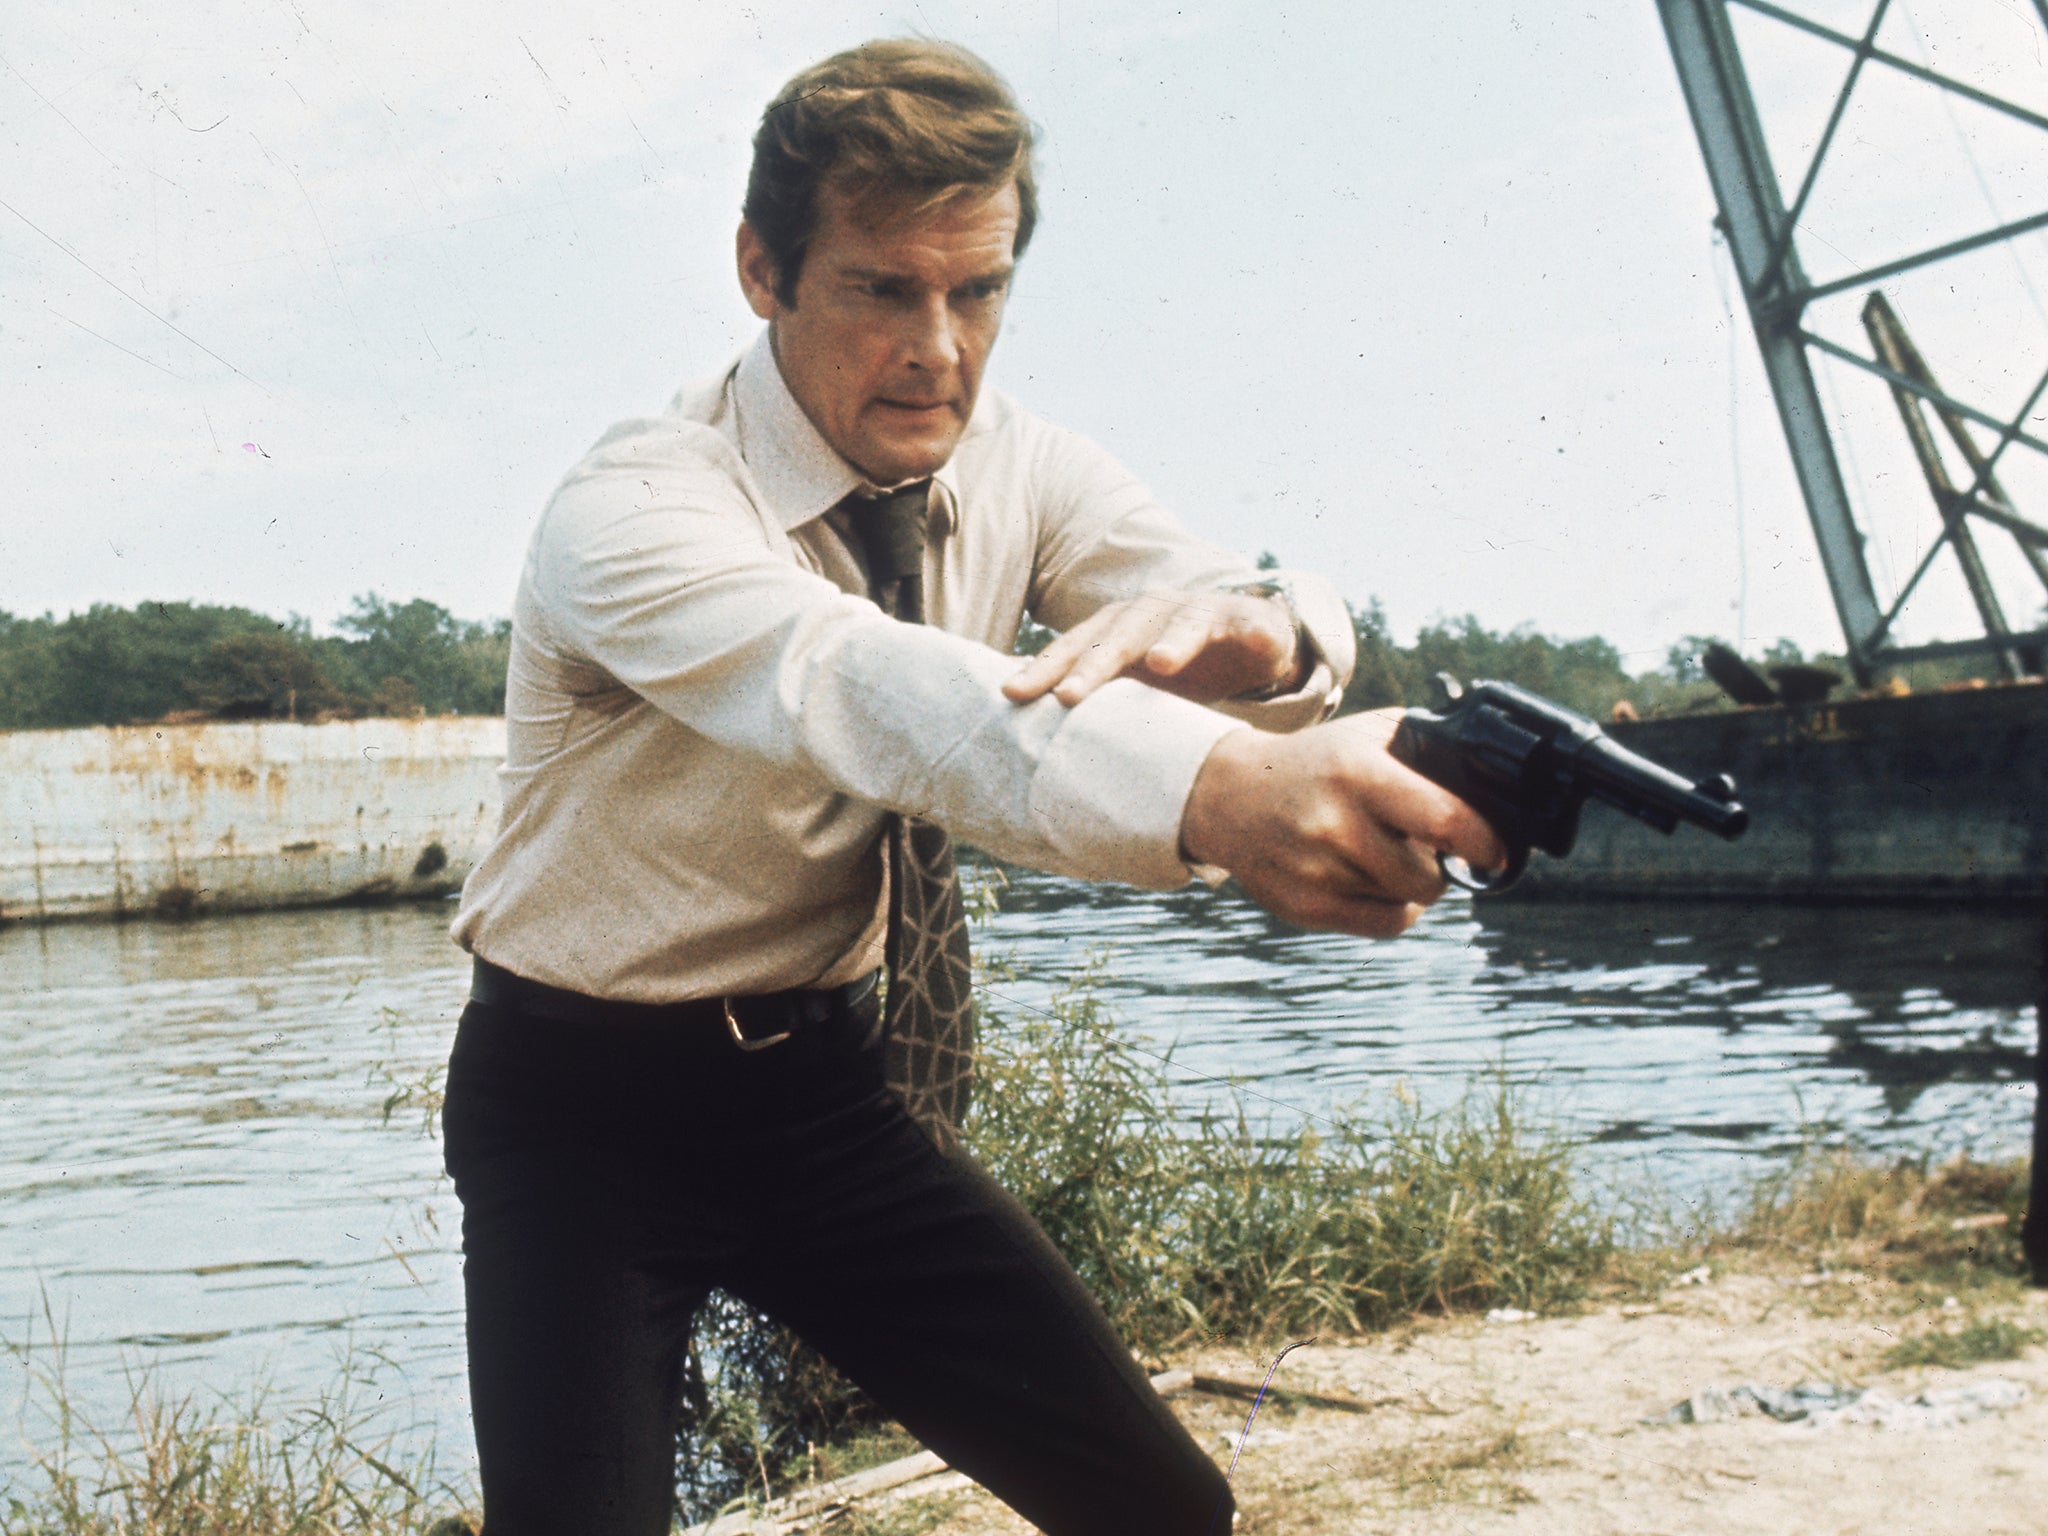 &#13;
Moore's first outing as Bond was in 'Live and Let Die' in 1973 &#13;